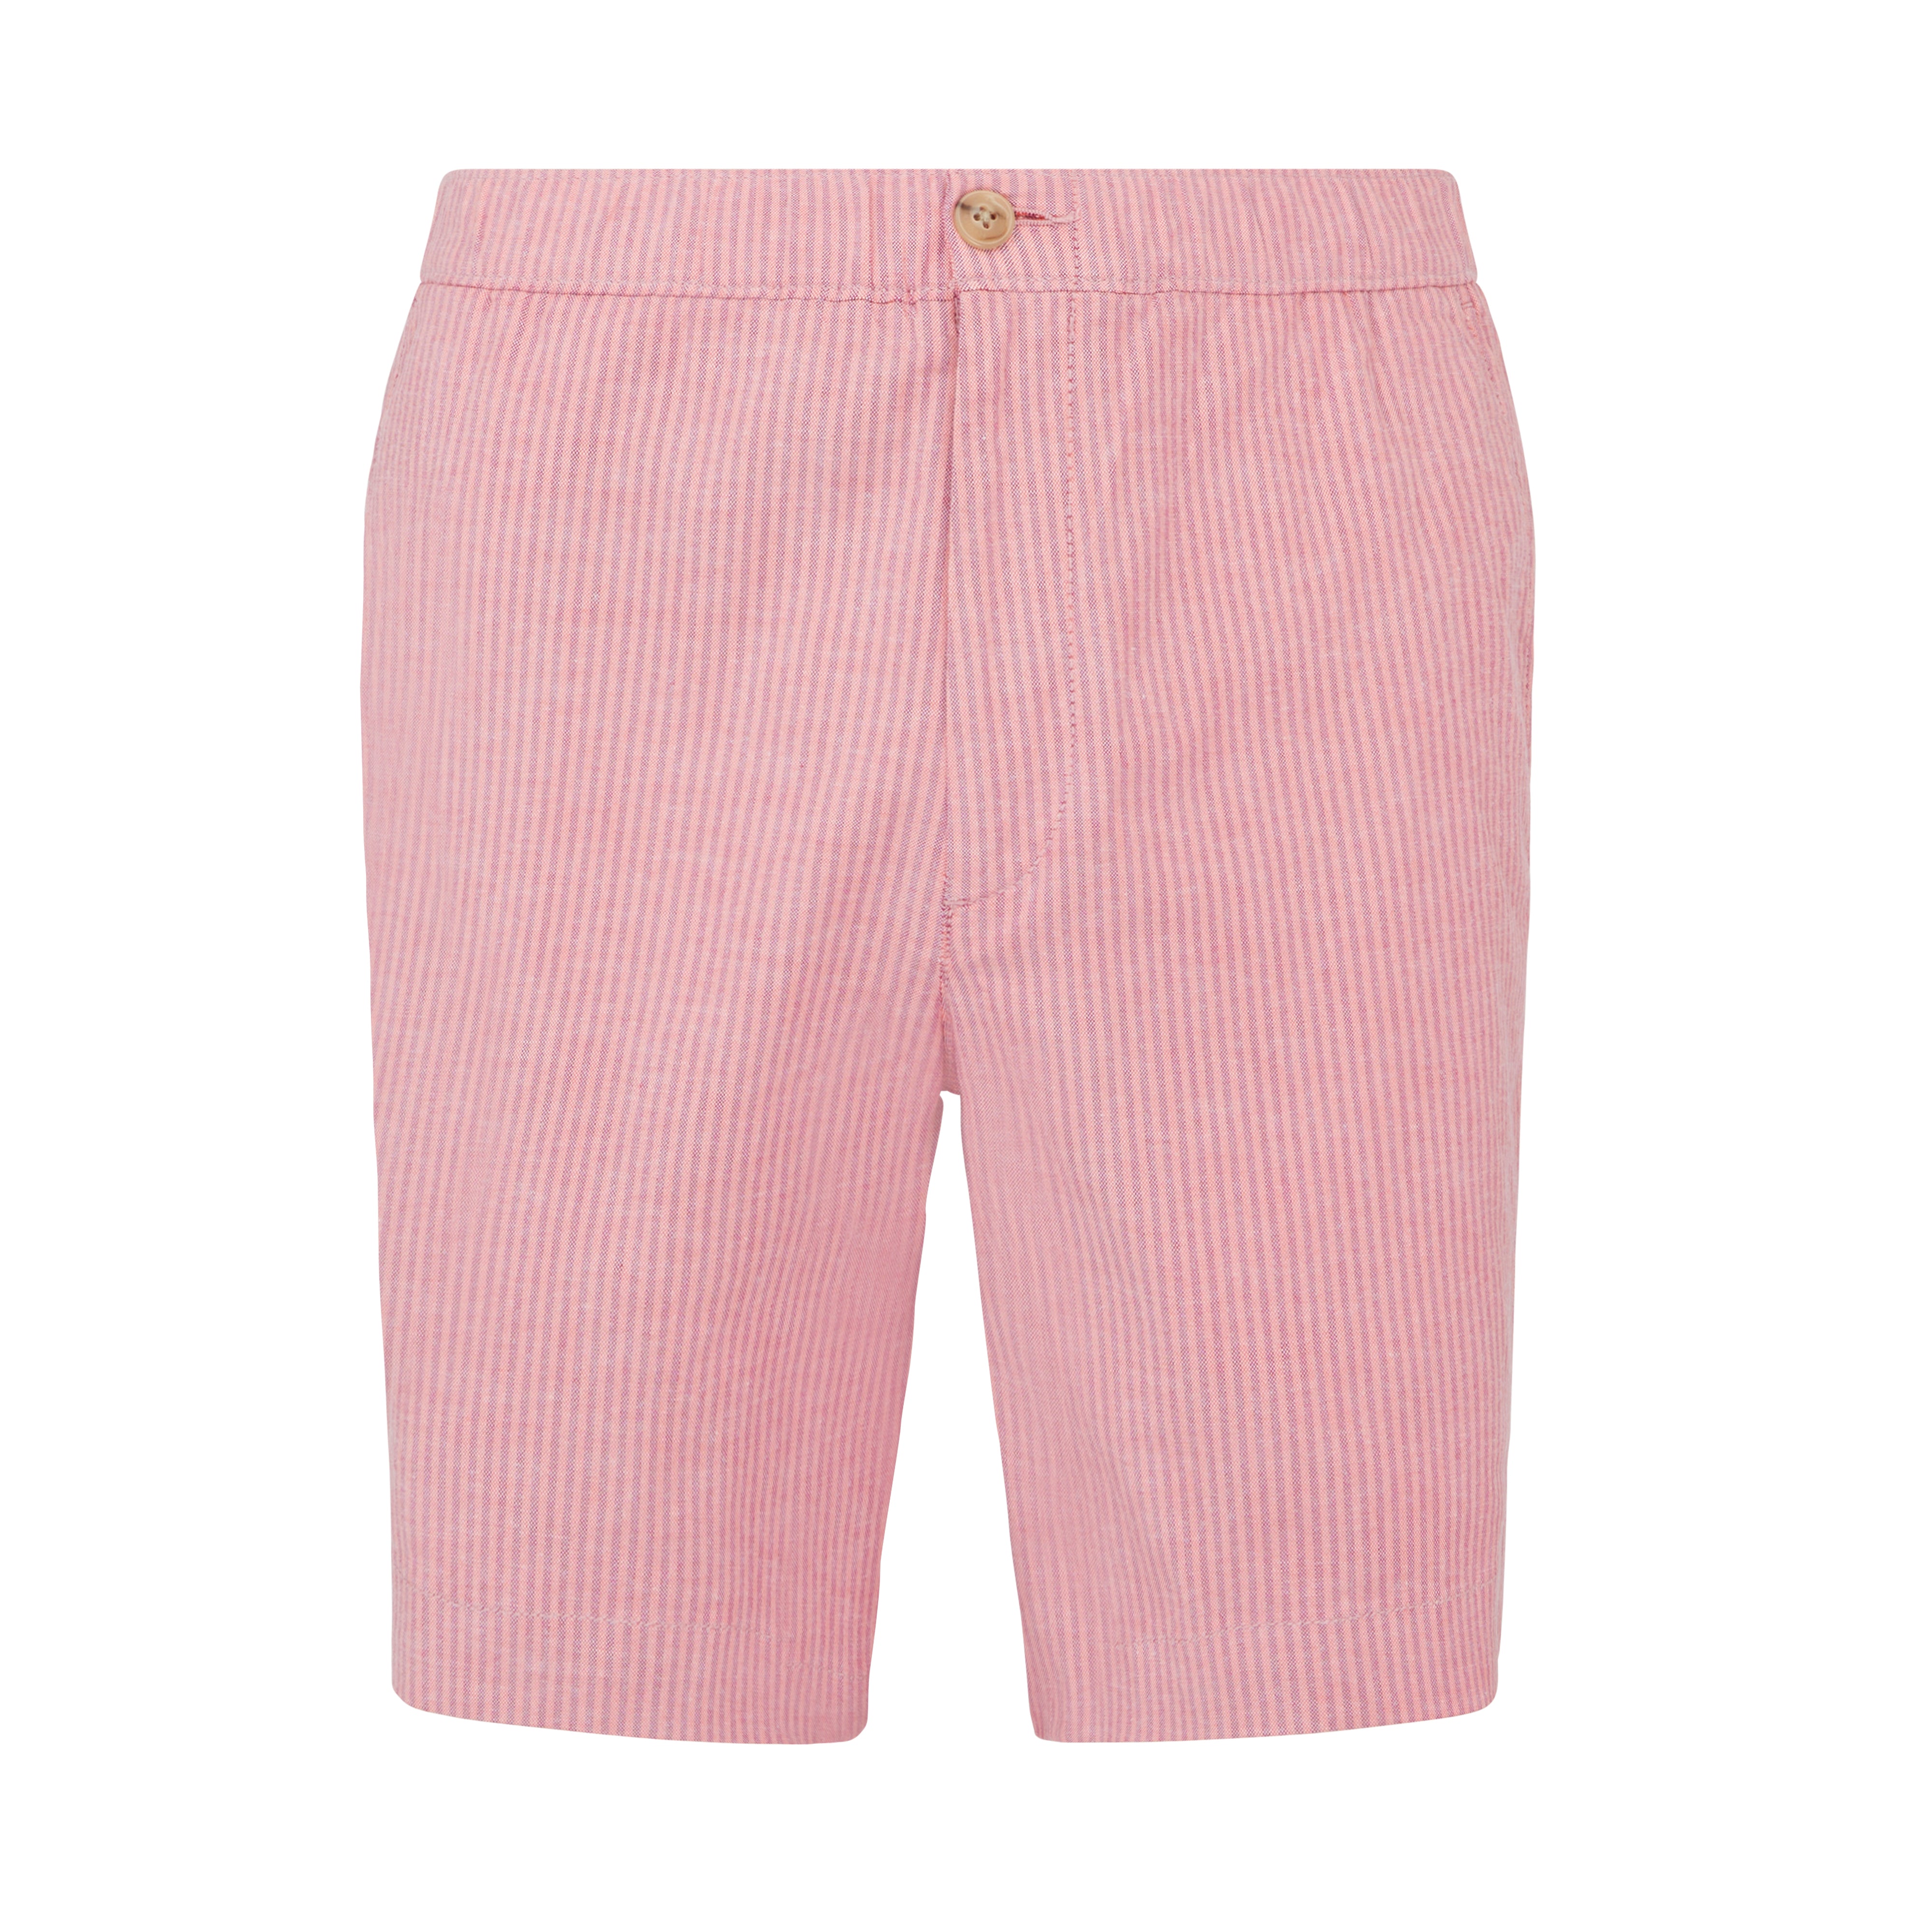 View Oxford Recycled Cotton Stripe Shorts In Hot Coral information